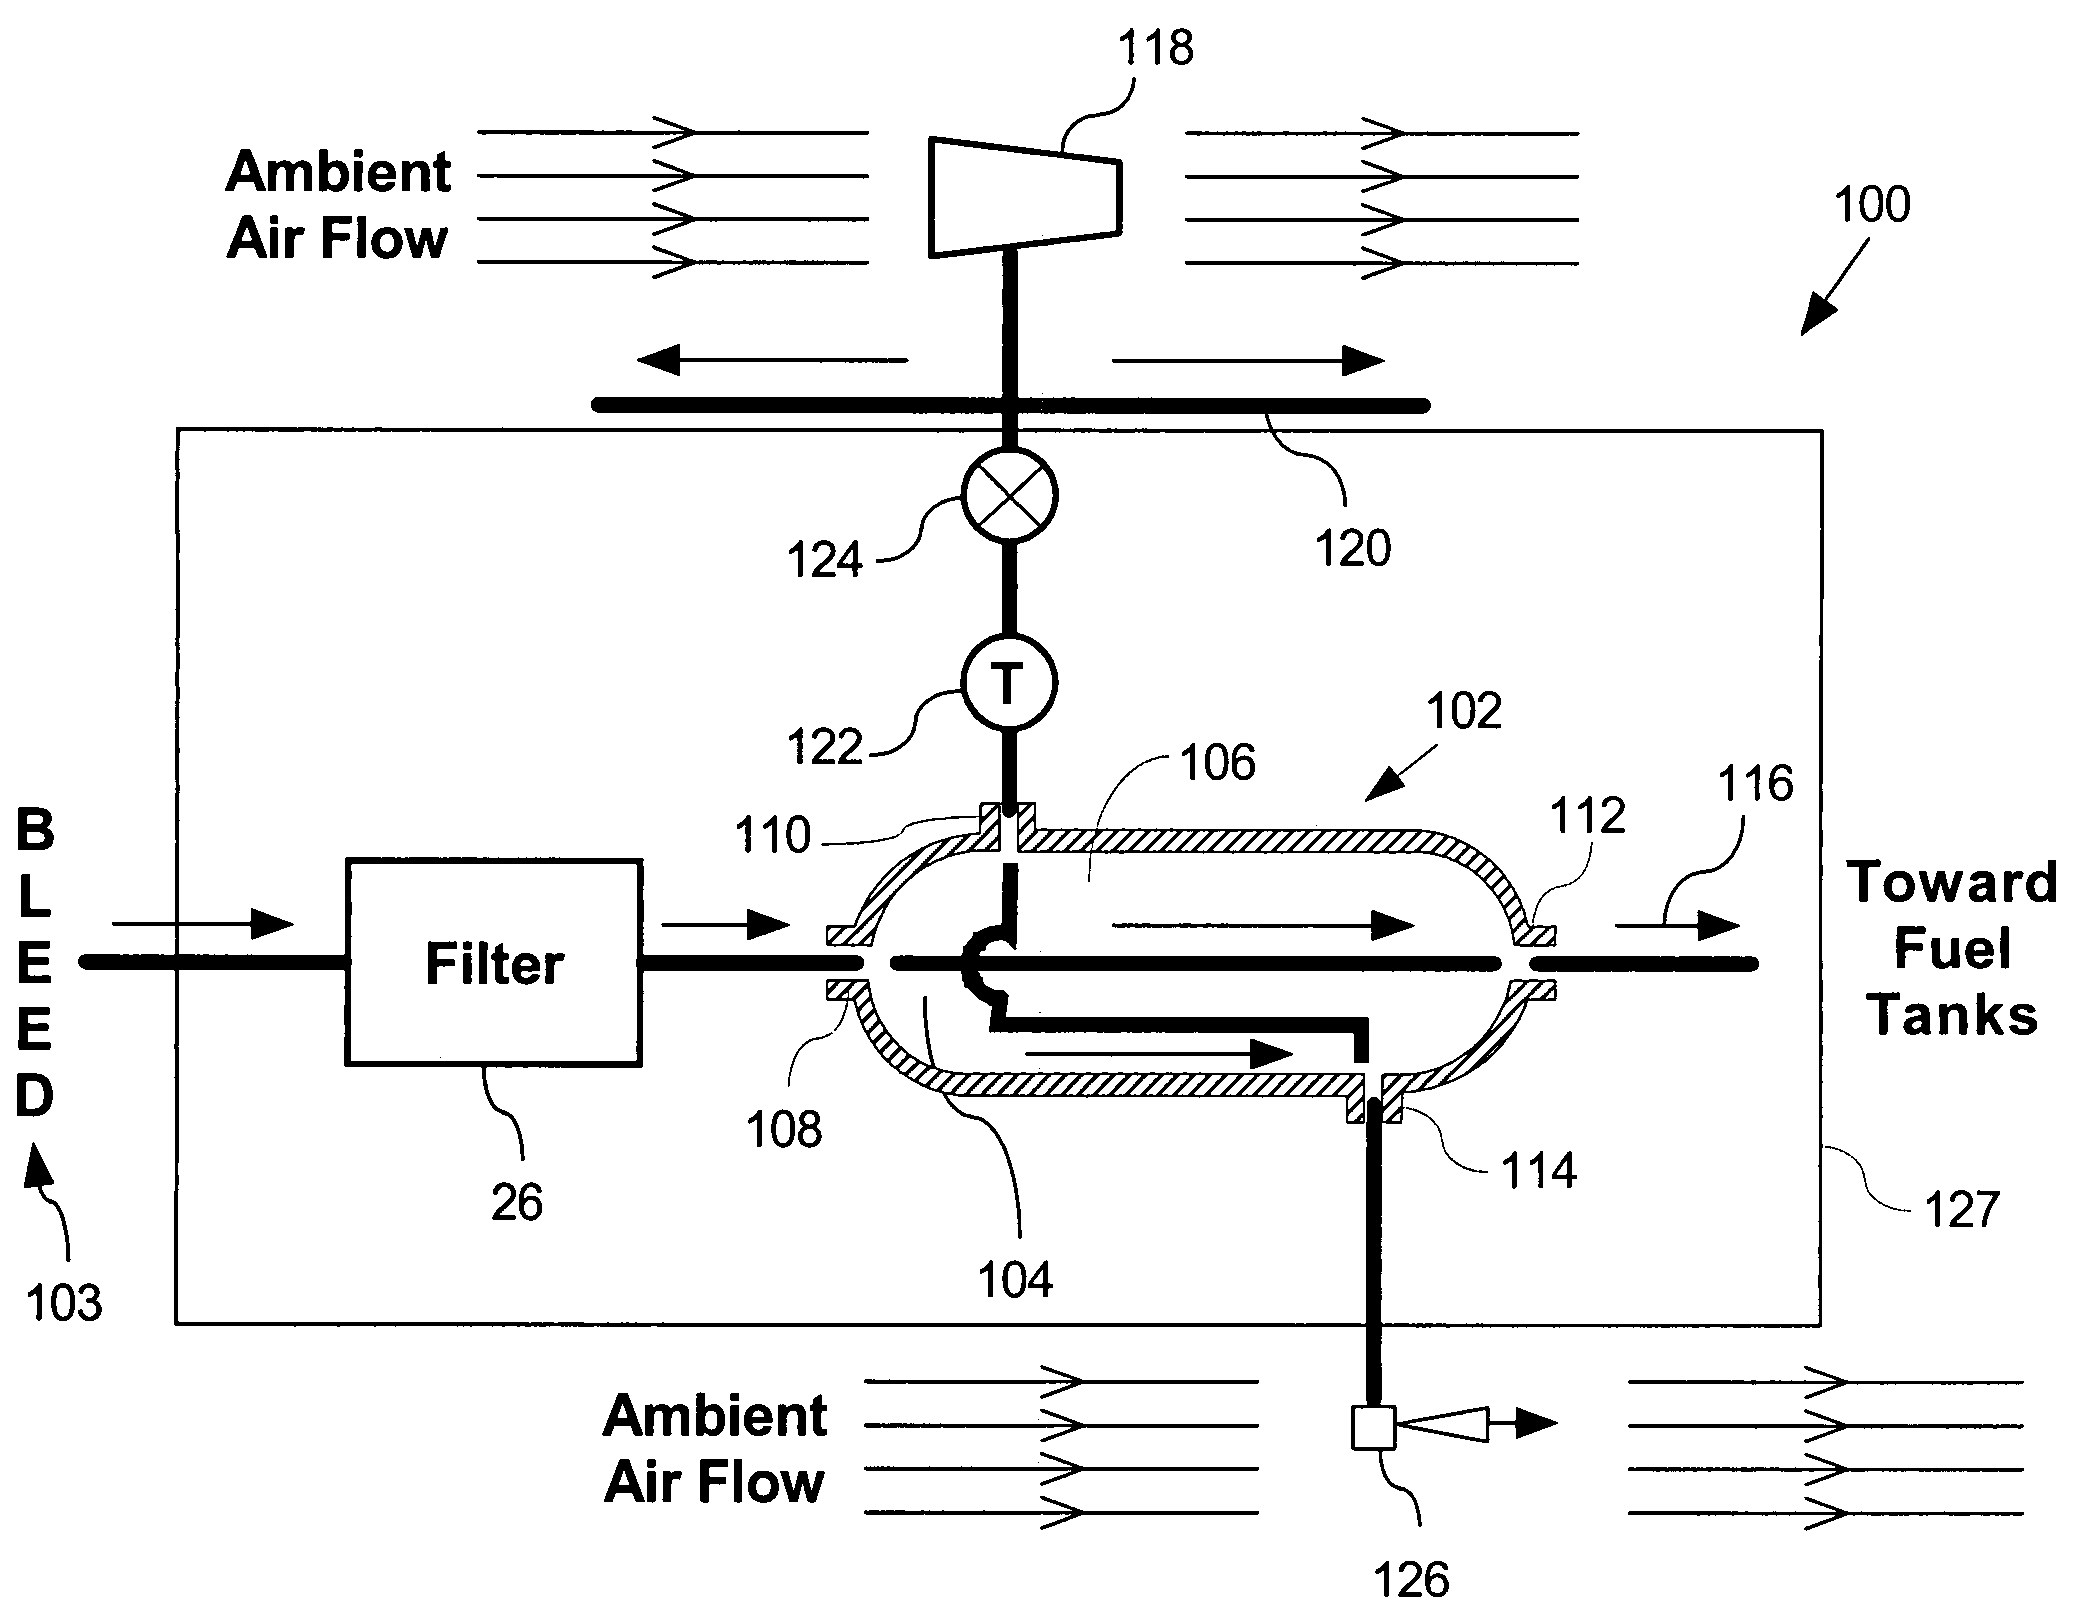 Cooling system for an on-board inert gas generating system